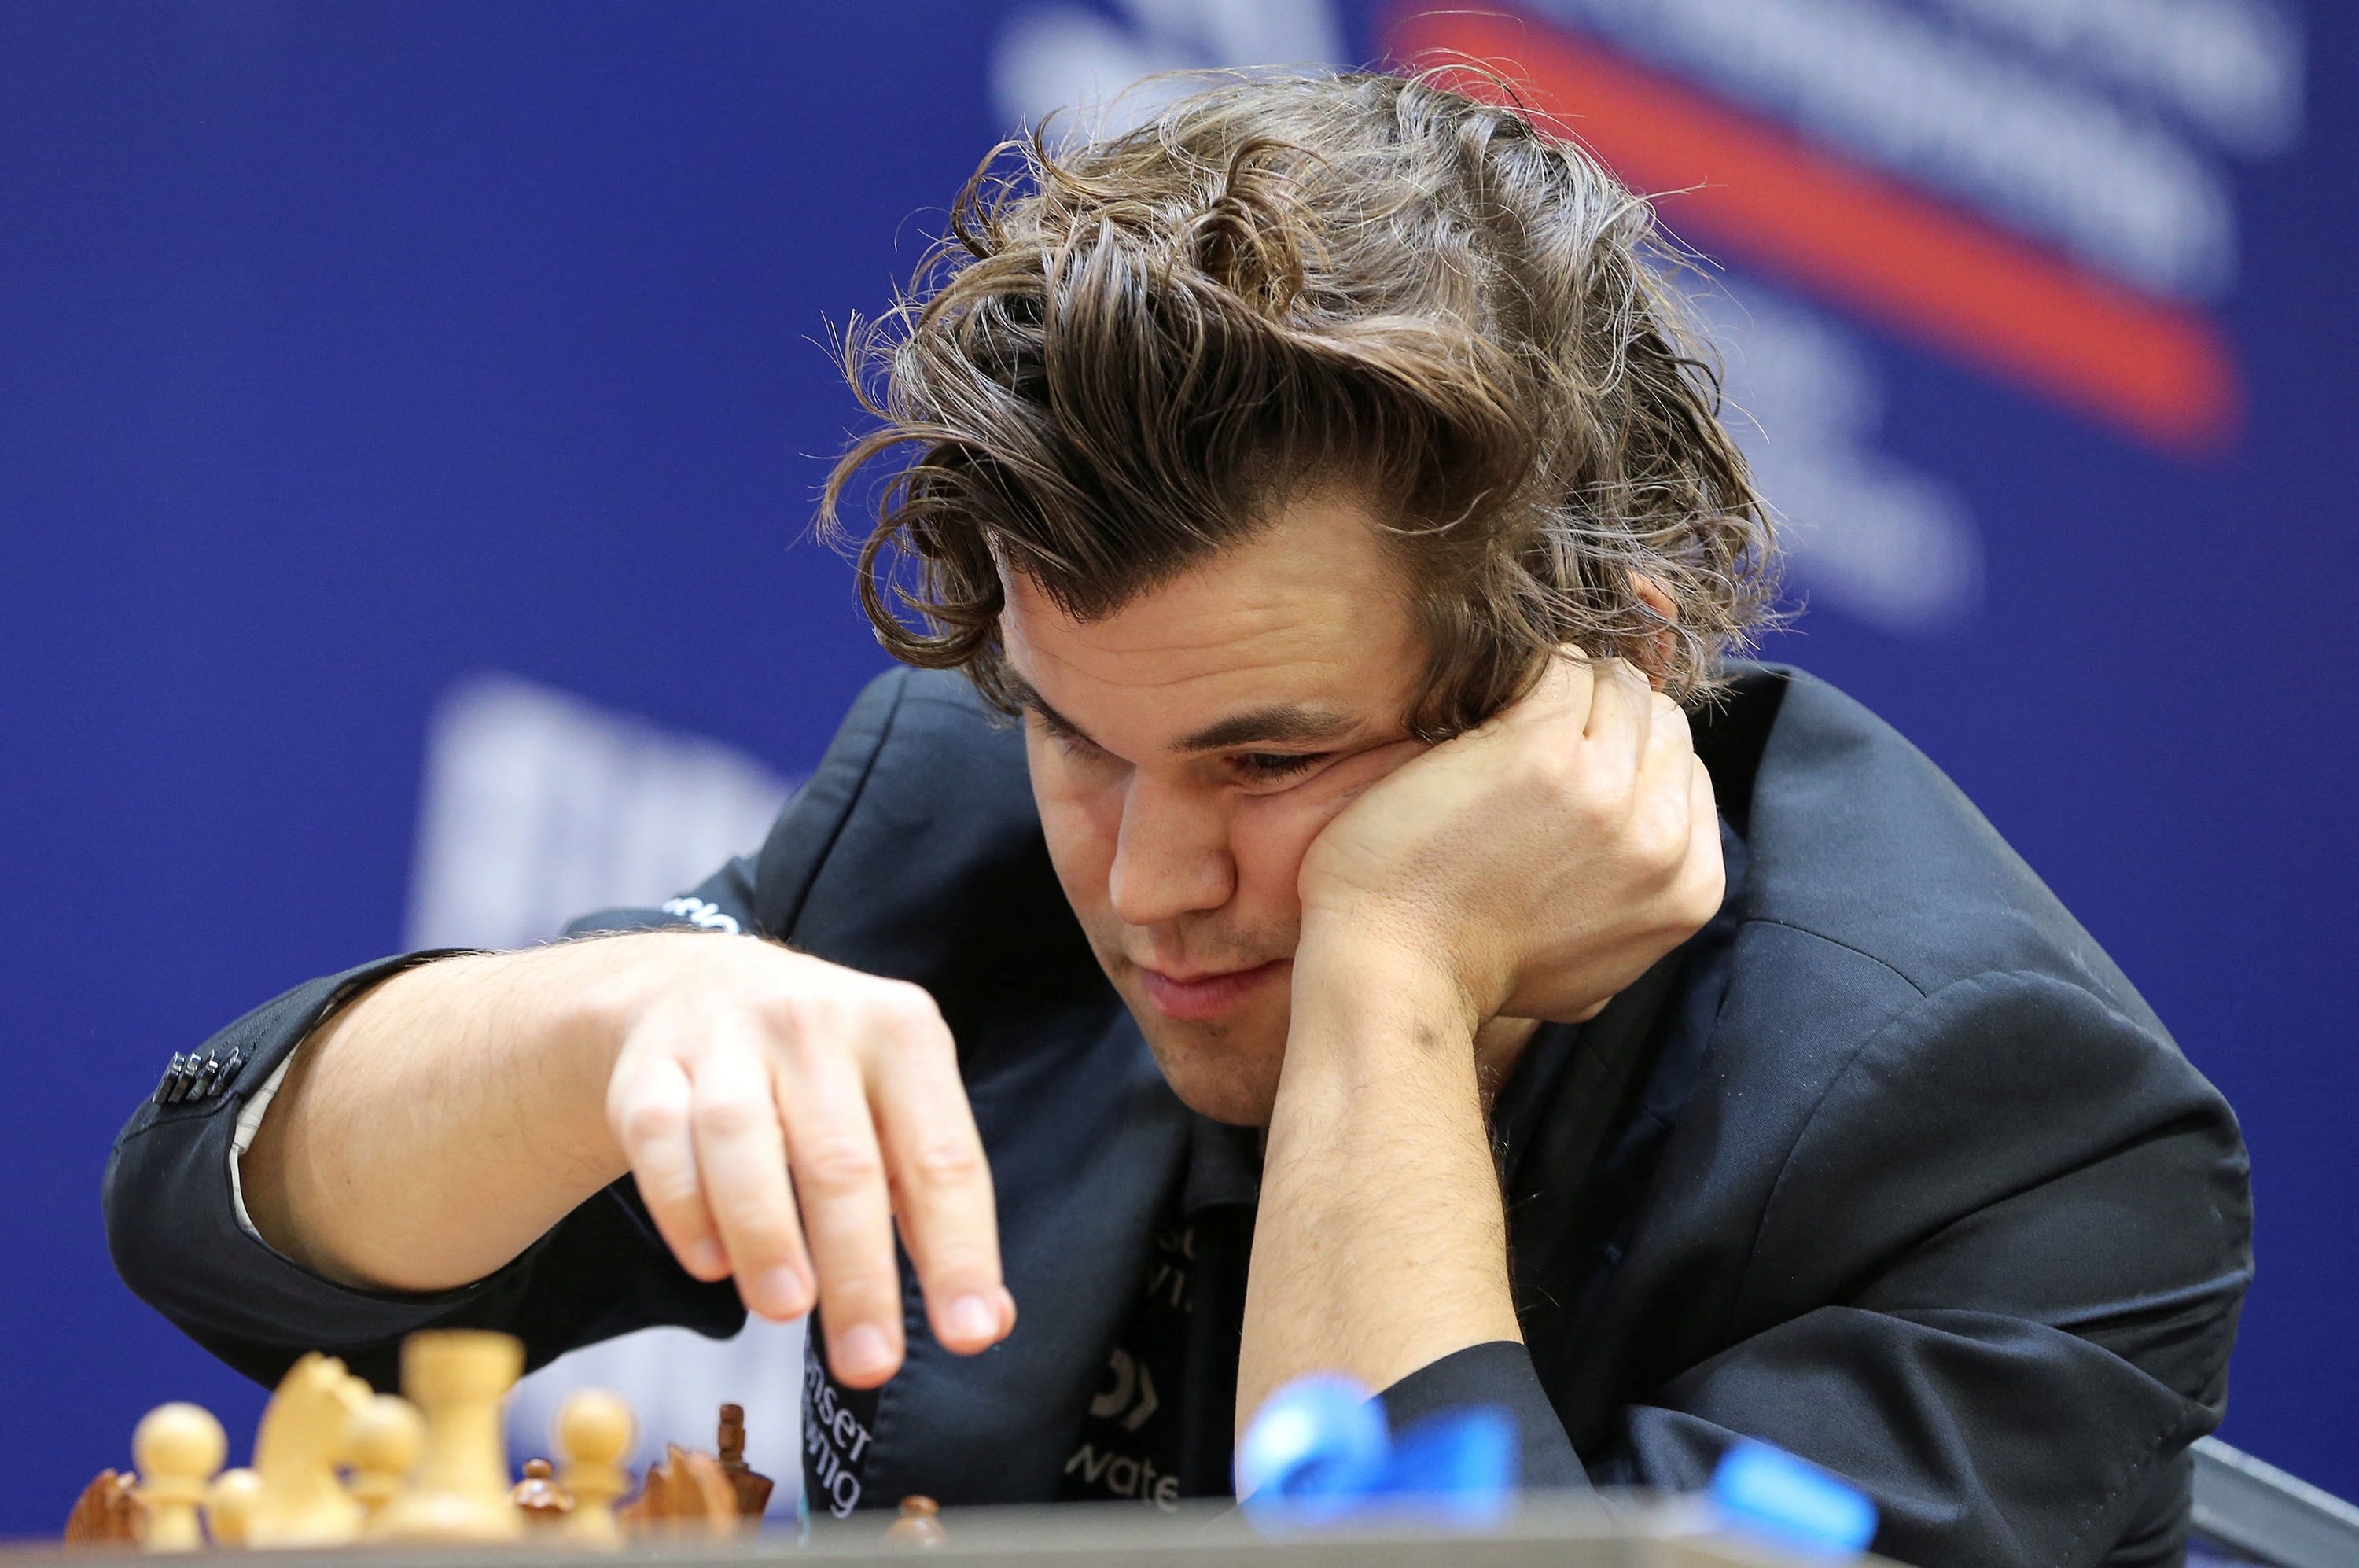 Both Carlsen and Niemann to Play in the FIDE Rapid and Blitz. Just Not  Against Each Other